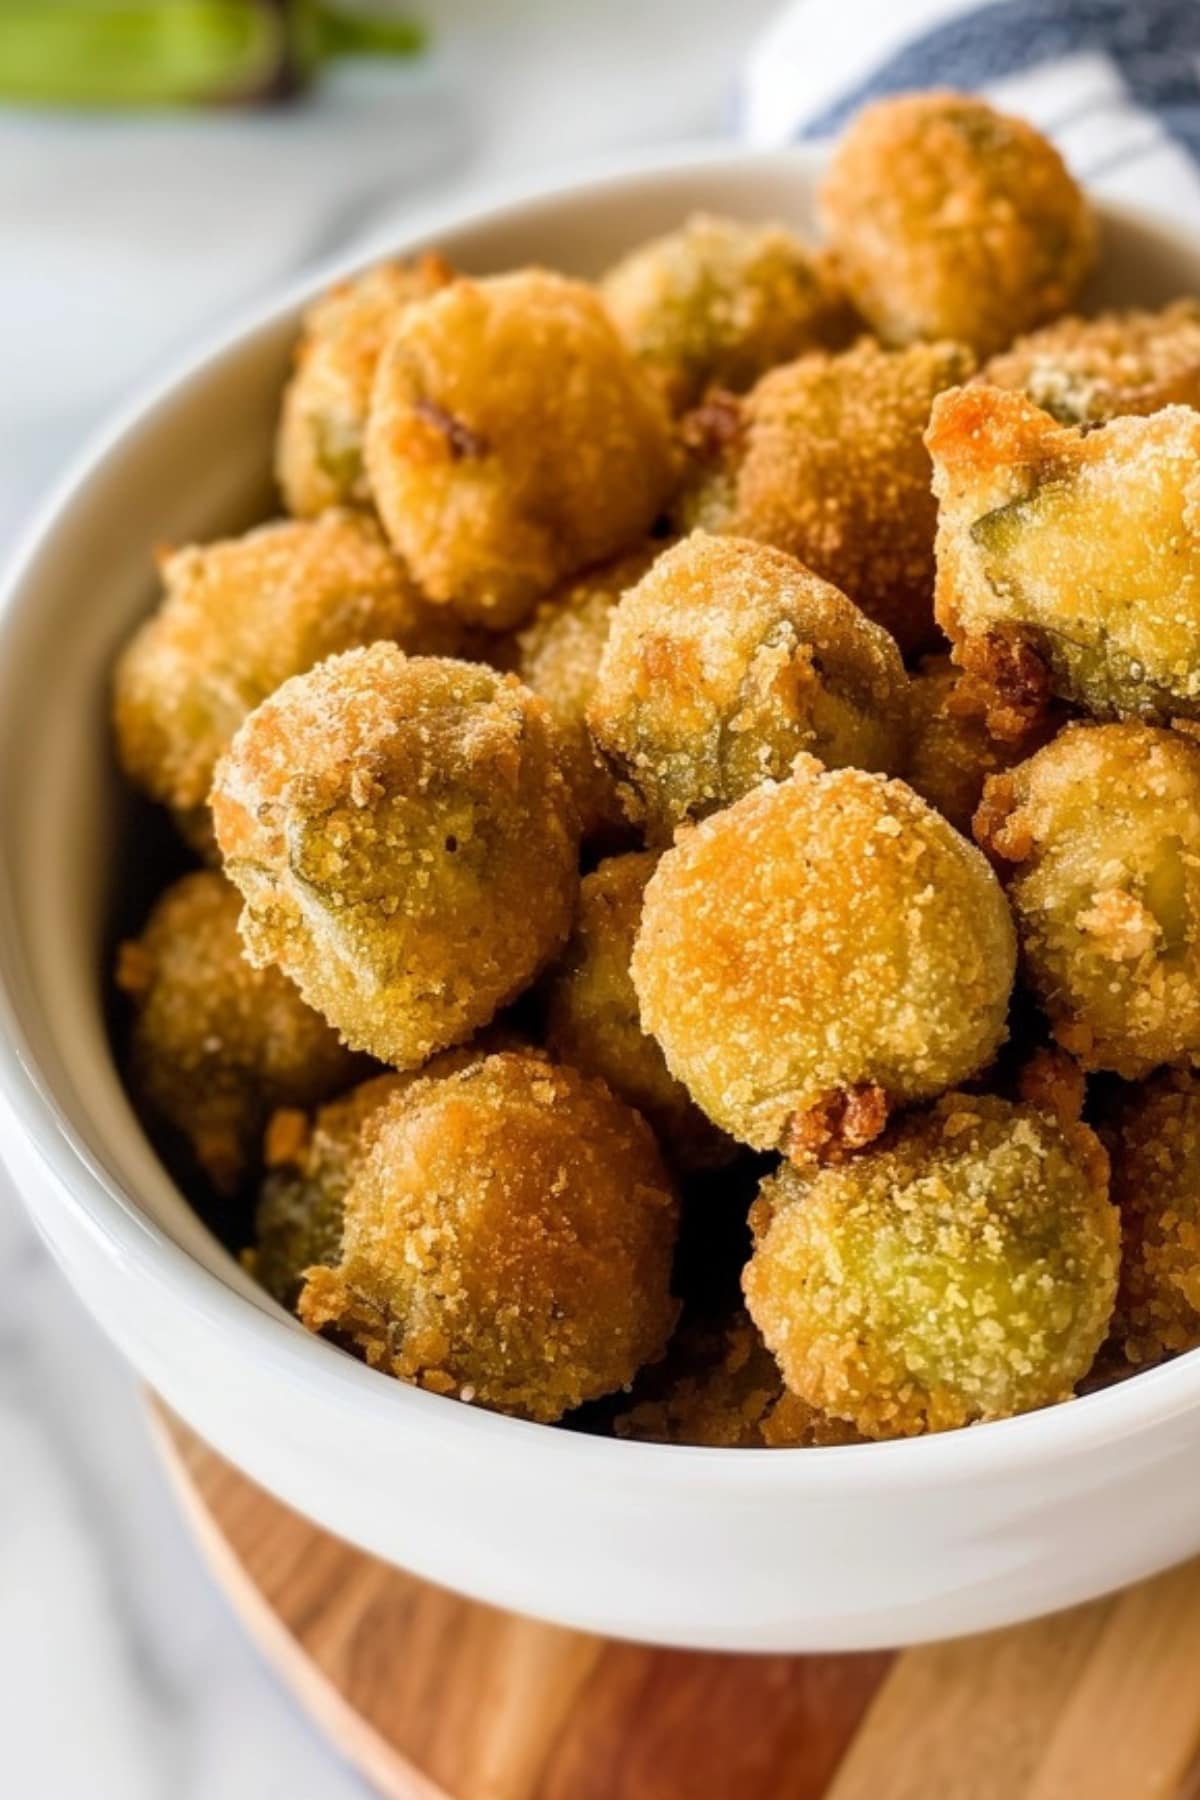 Coated fried okra in a white bowl.